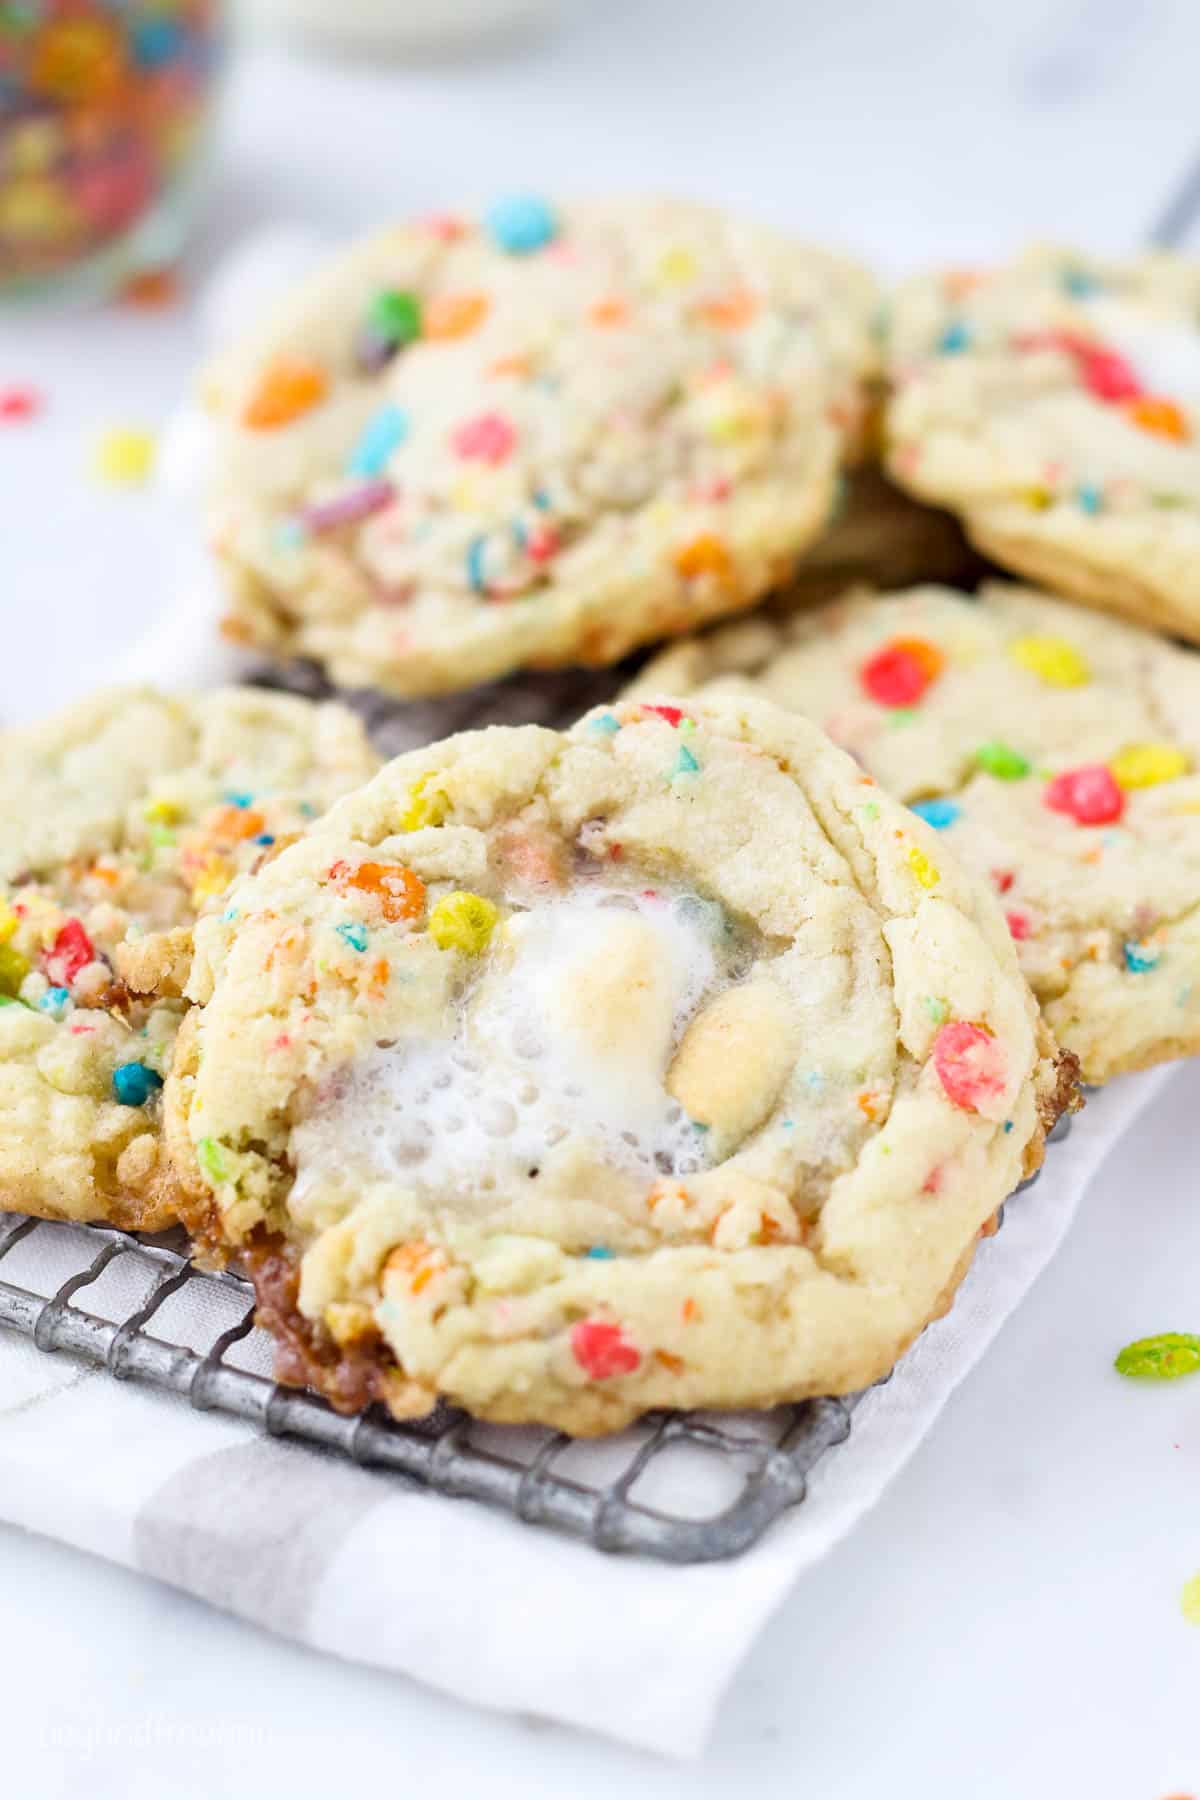 Overhead view of fruity pebble marshmallow cookies on a cooling rack